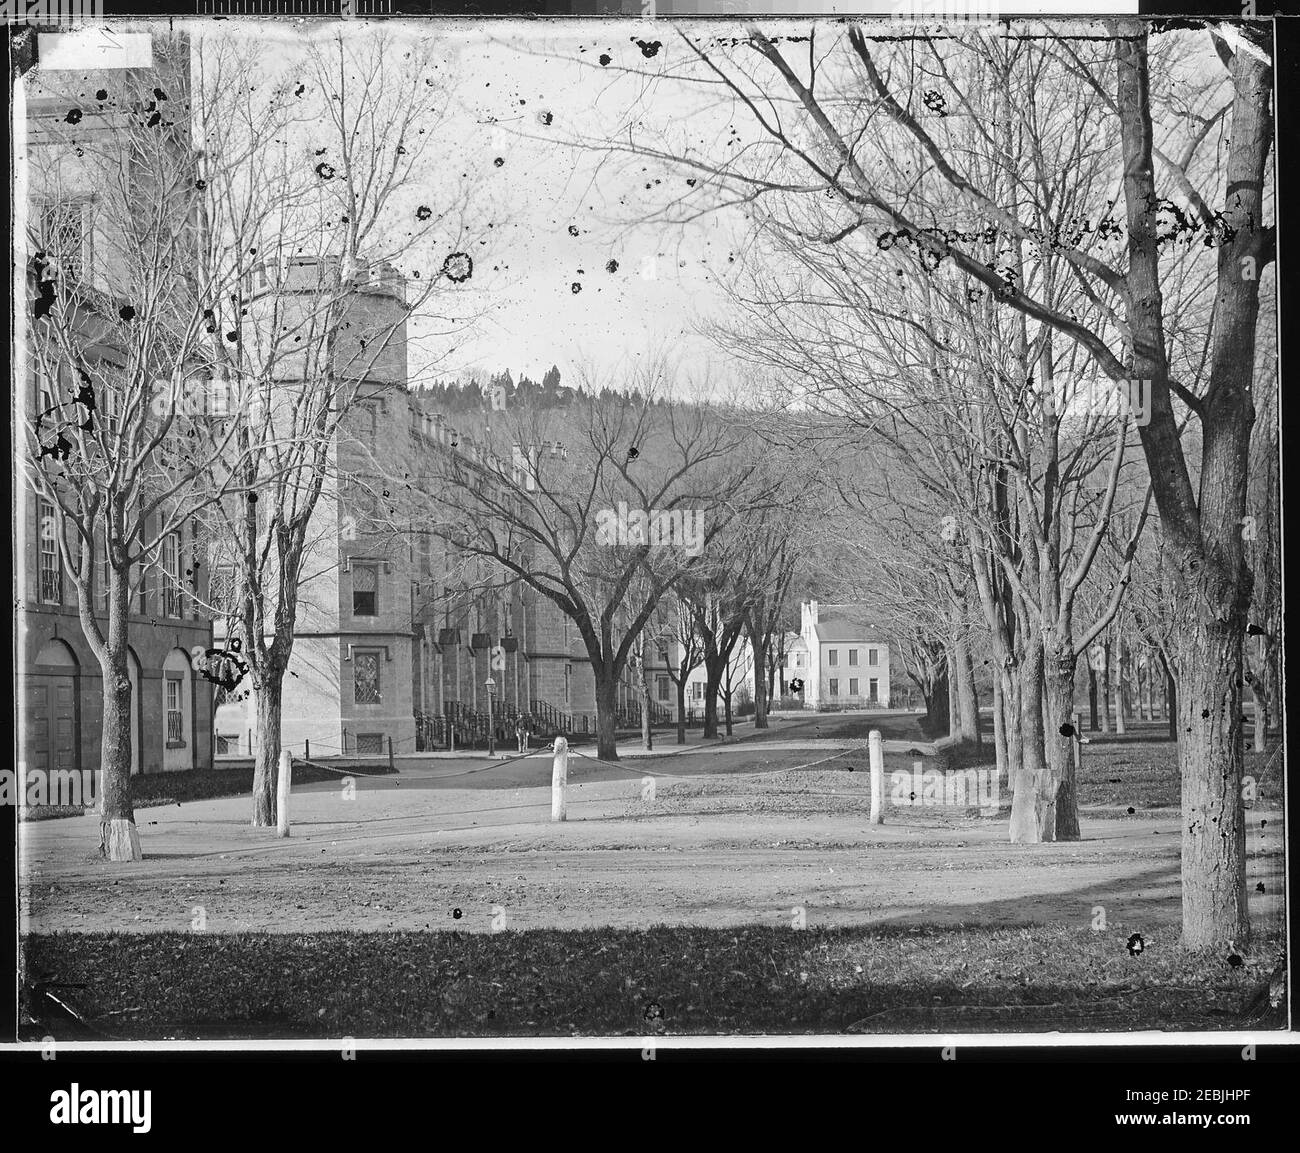 Fronte nord delle caserme, West Point, N.Y. (4222298725). Foto Stock